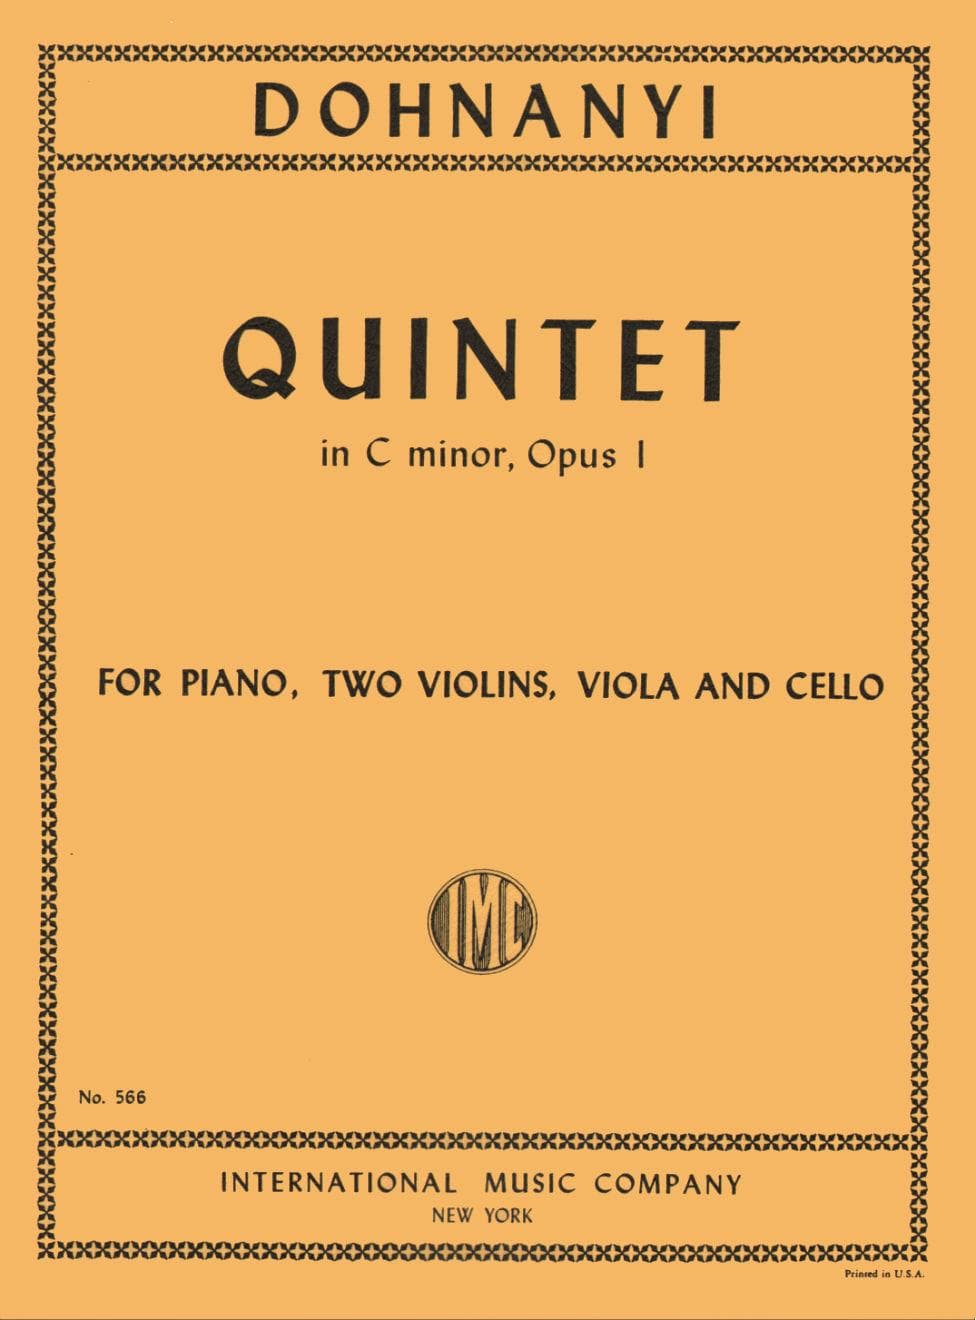 Dohnányi, Ernö - Piano Quintet No 1 in c minor, Op 1 - Two Violins, Viola, Cello, and Piano - edited by Isidor Philipp - International Edition